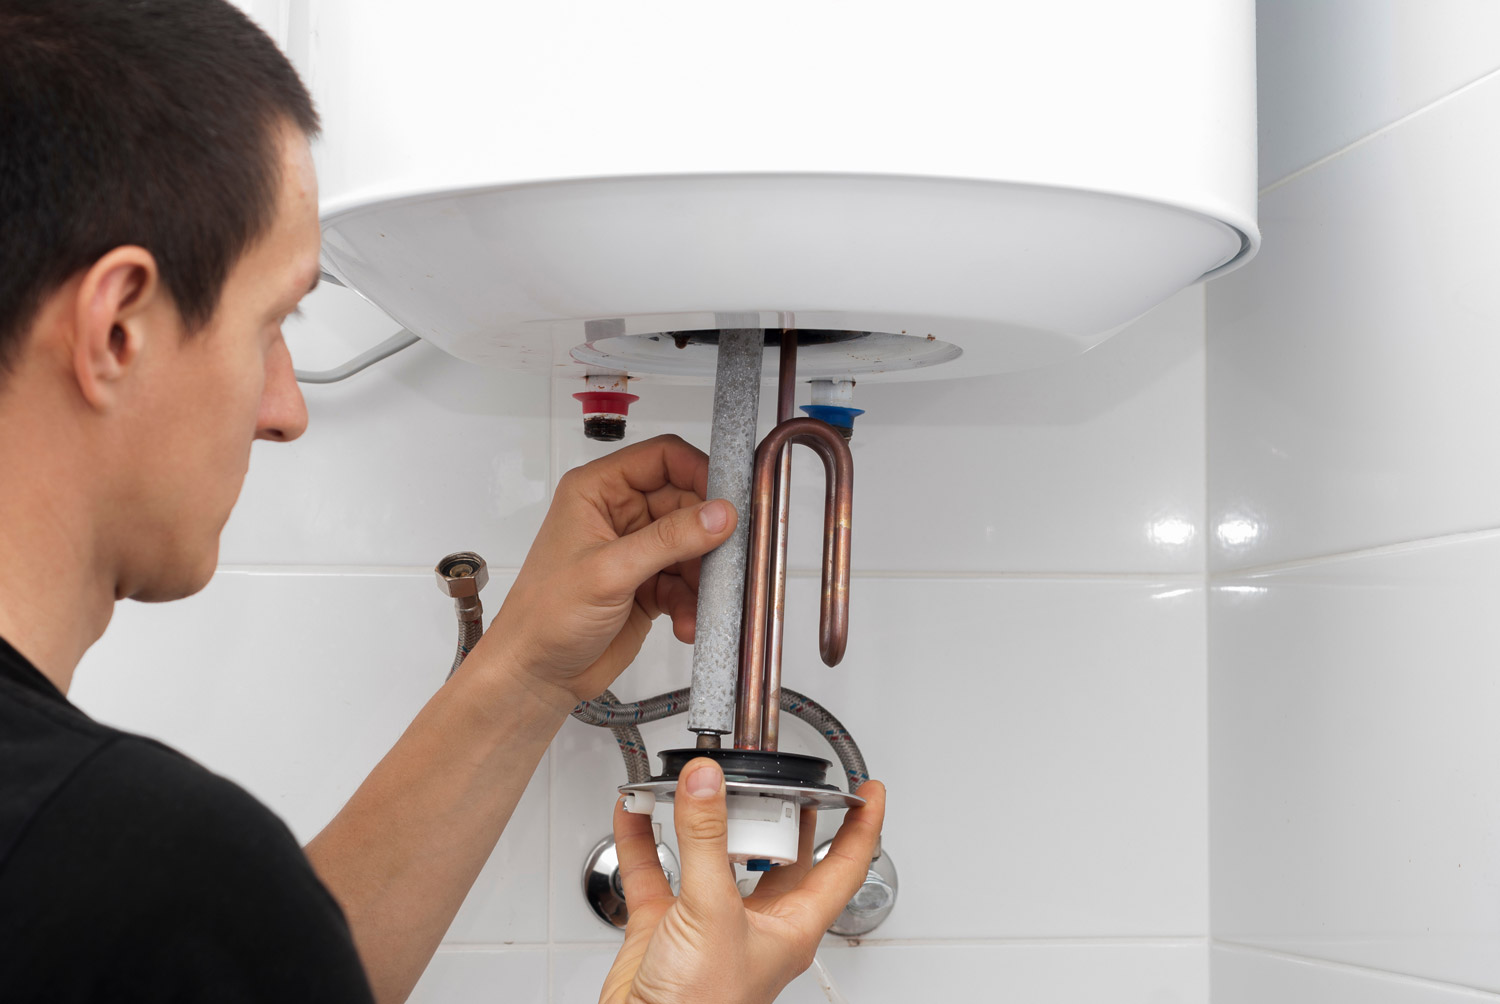 Owner’s Guide to Hot Water Heater Maintenance